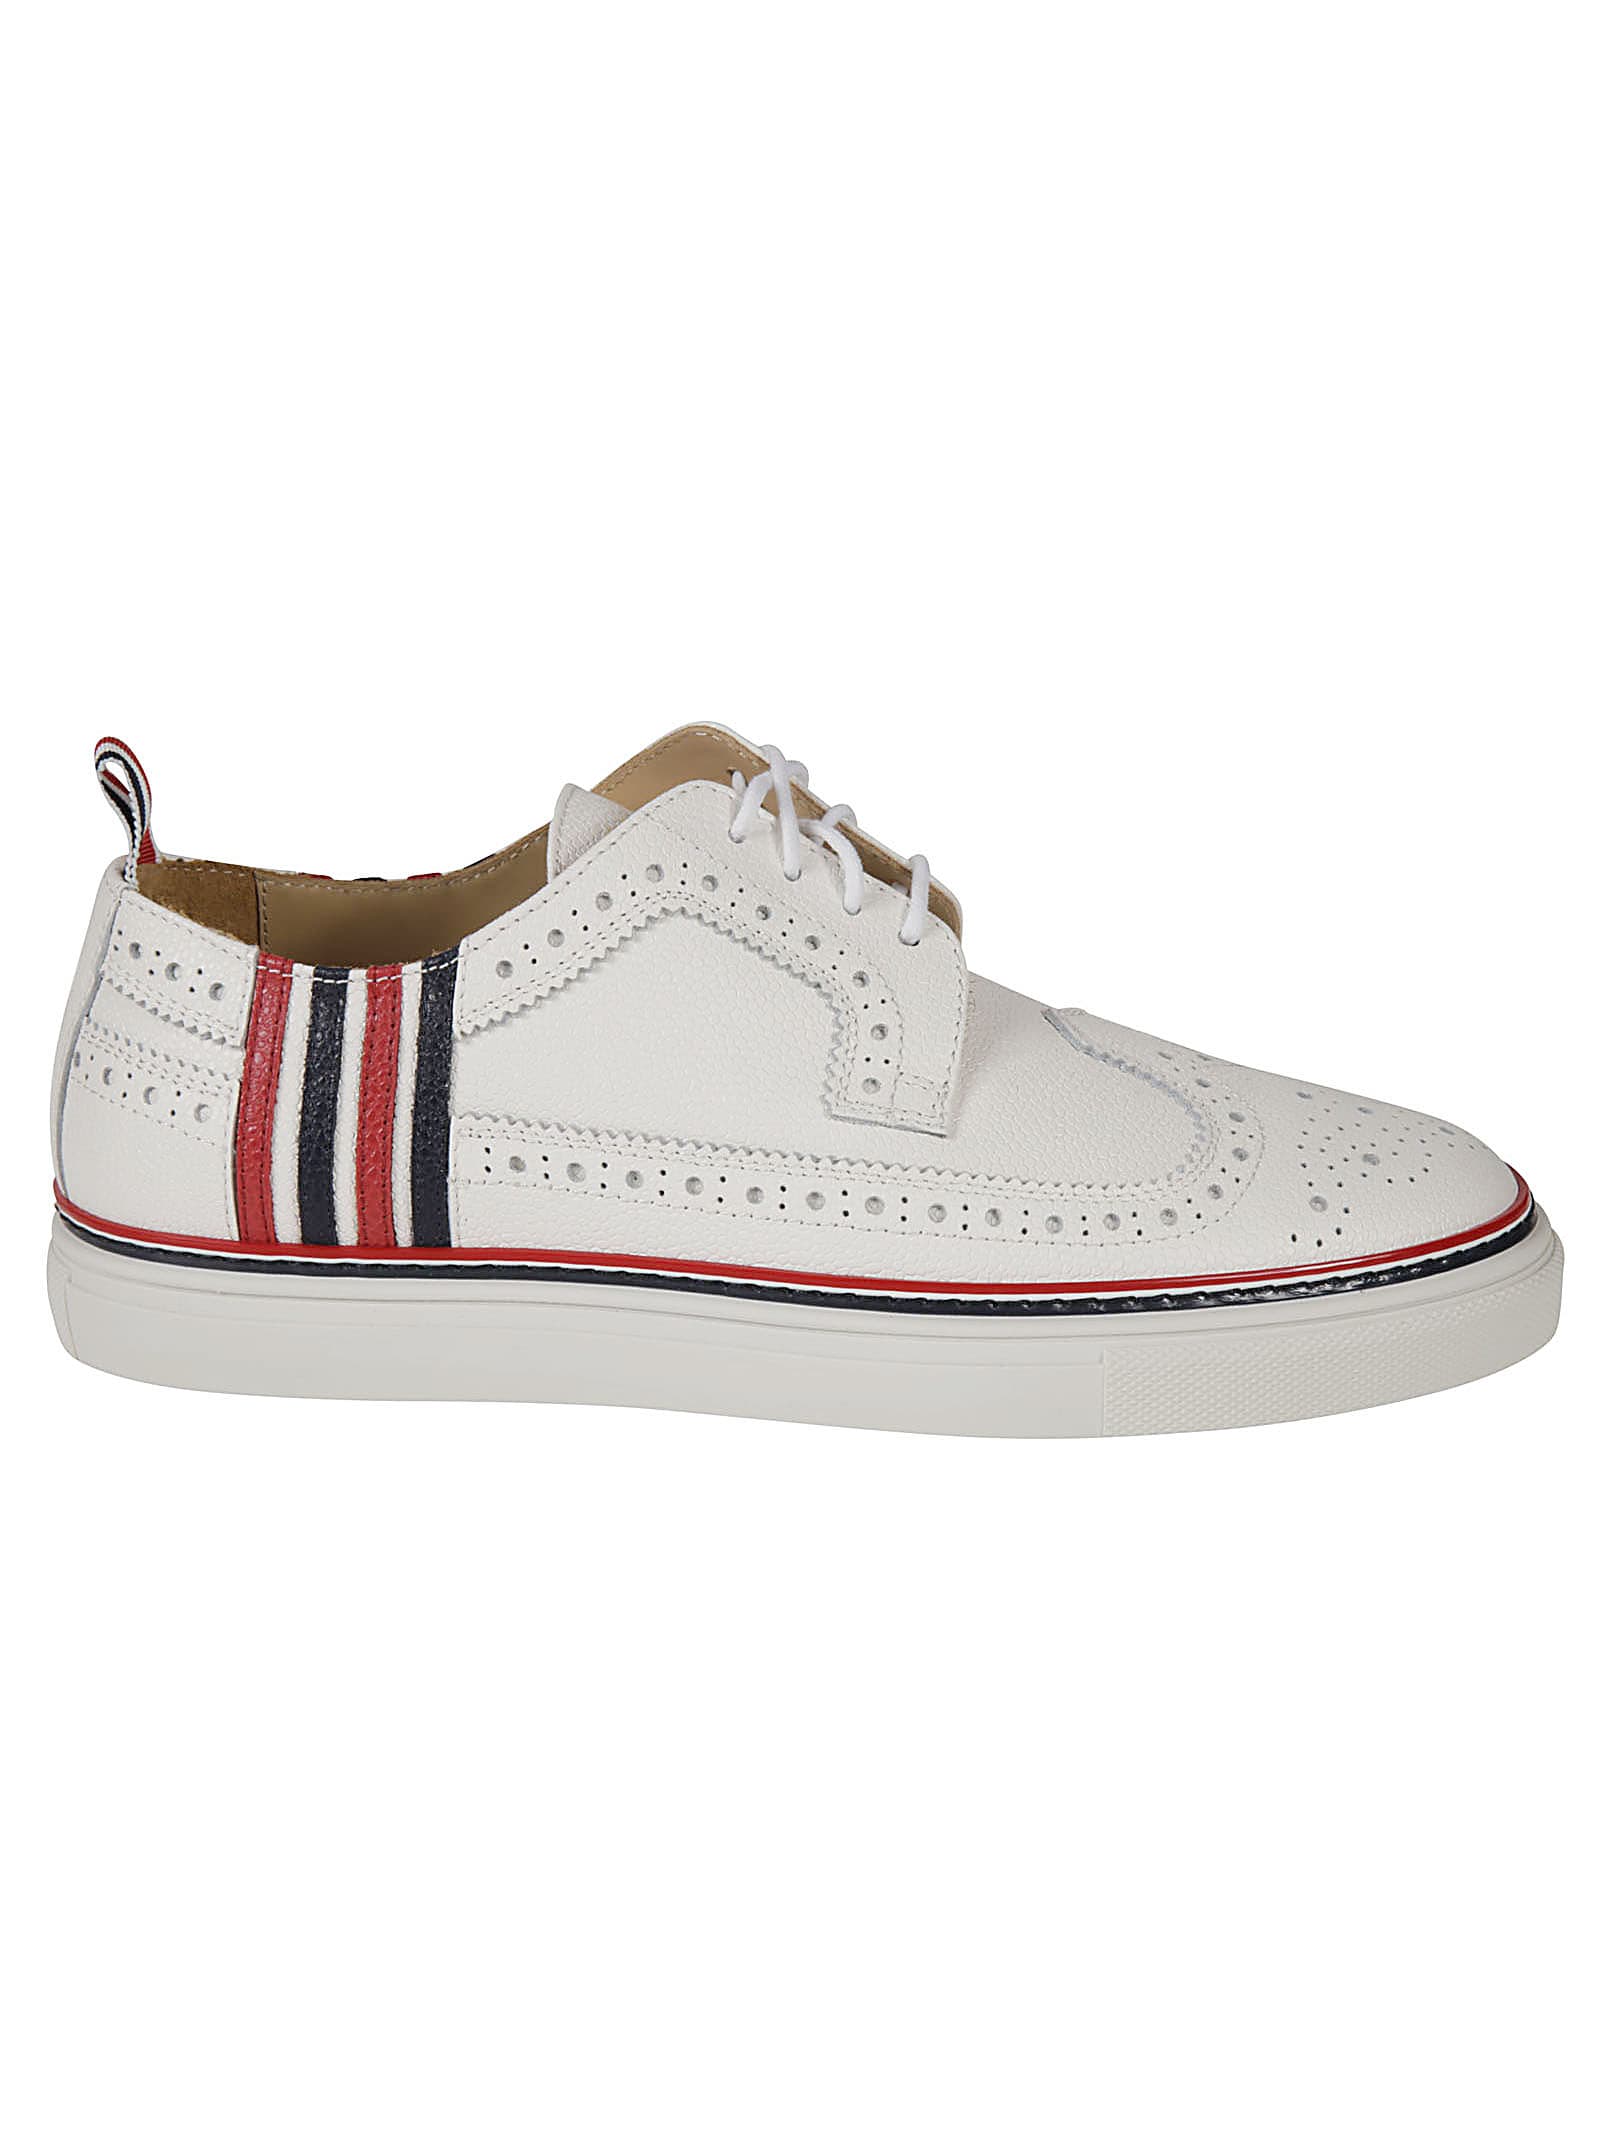 THOM BROWNE LONGWING BROGUE trainers,11255410